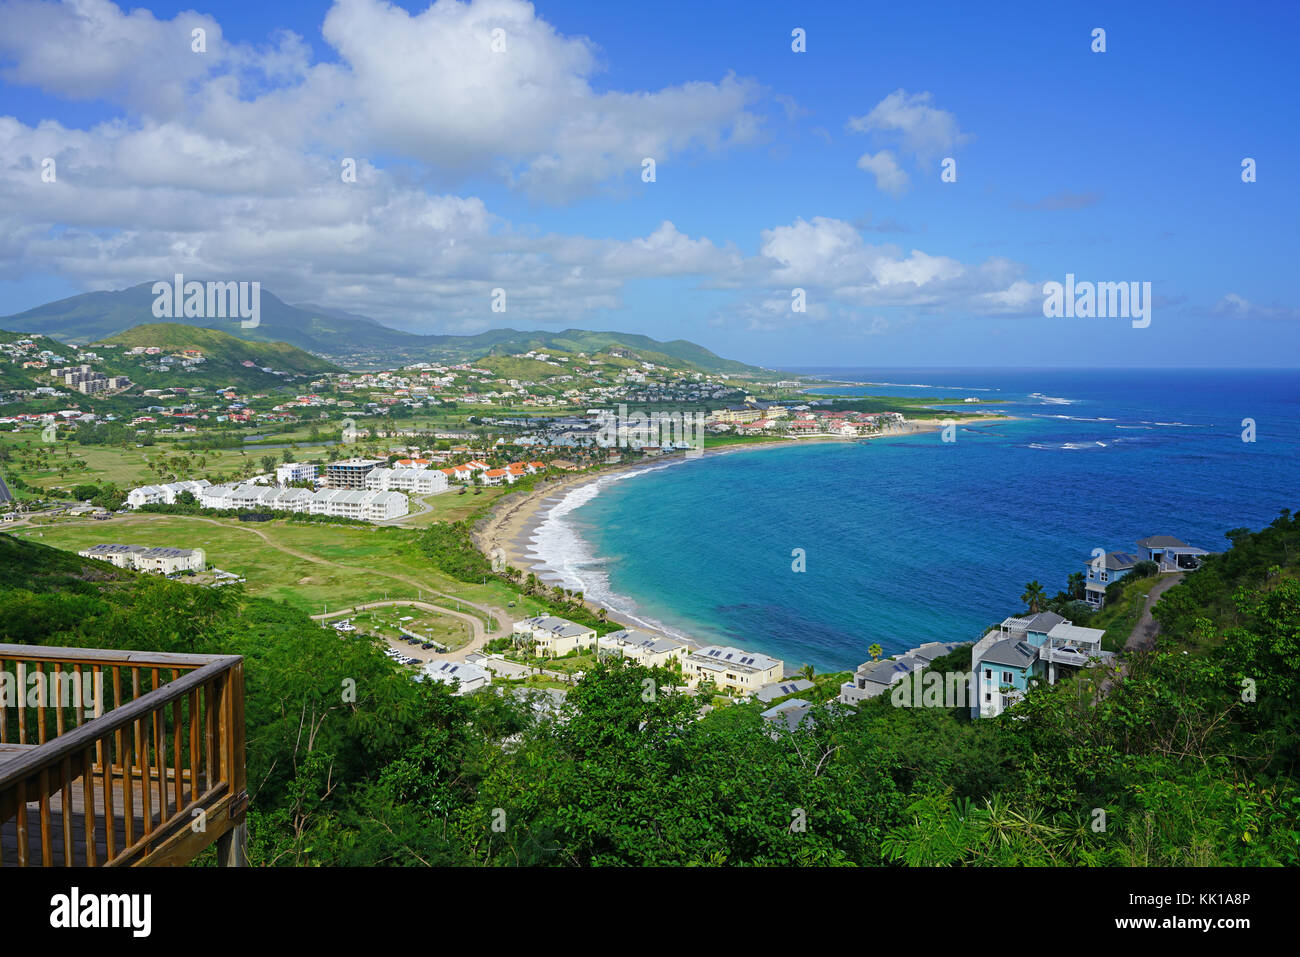 Frigate Bay beach in St Kitts, Saint Kitts and Nevis Stock Photo